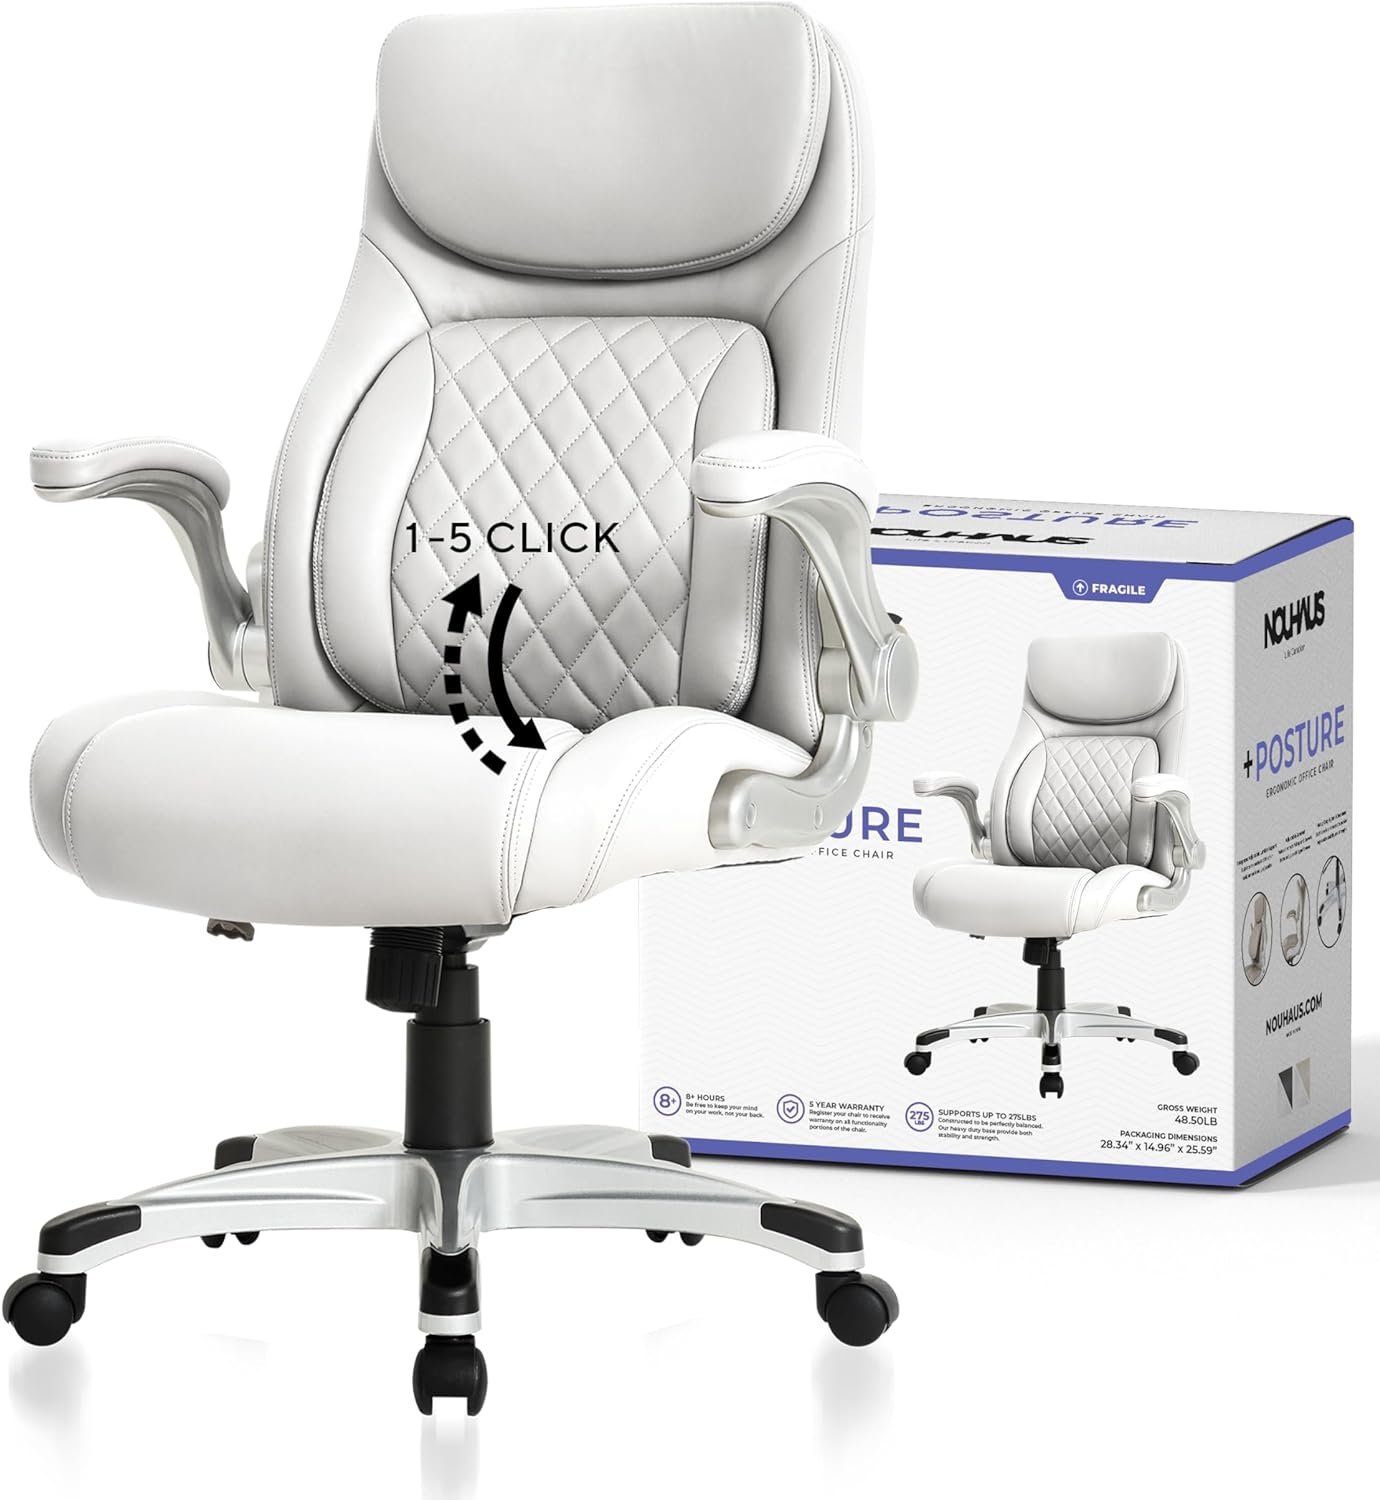 Nouhaus +Posture Ergonomic PU Leather Office Chair. Click5 Lumbar Support with FlipAdjust Armrests. Modern Executive Chair and Computer Desk Chair (White)